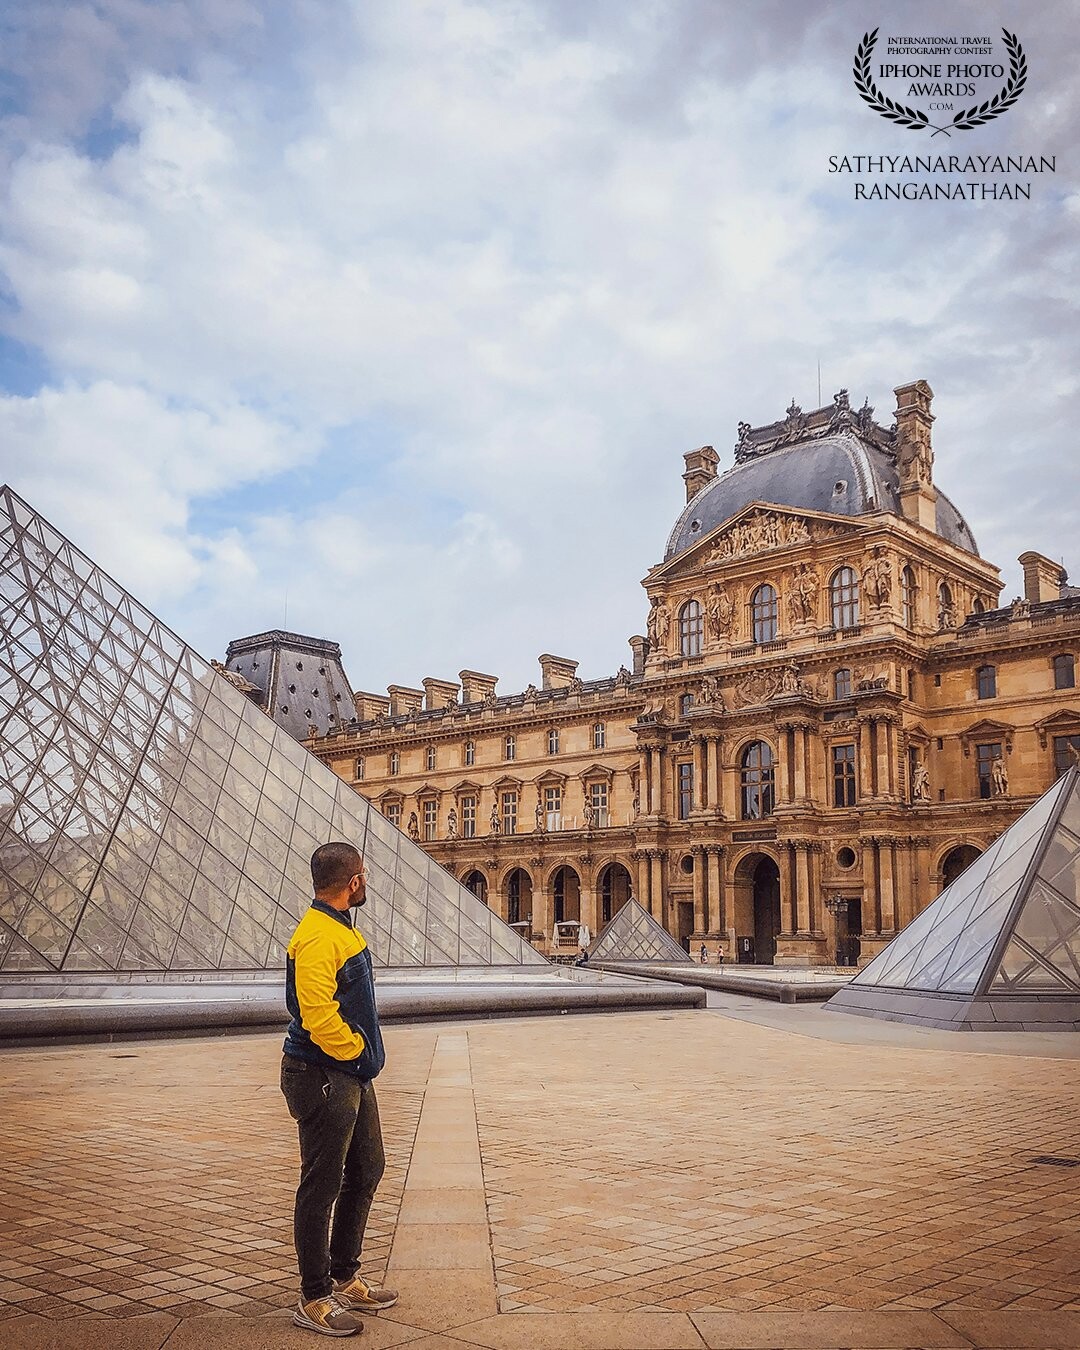 This picture was taken at the Louvre Museum when the guy was watching the mesmerizing architecture in the middle of the Pyramids.